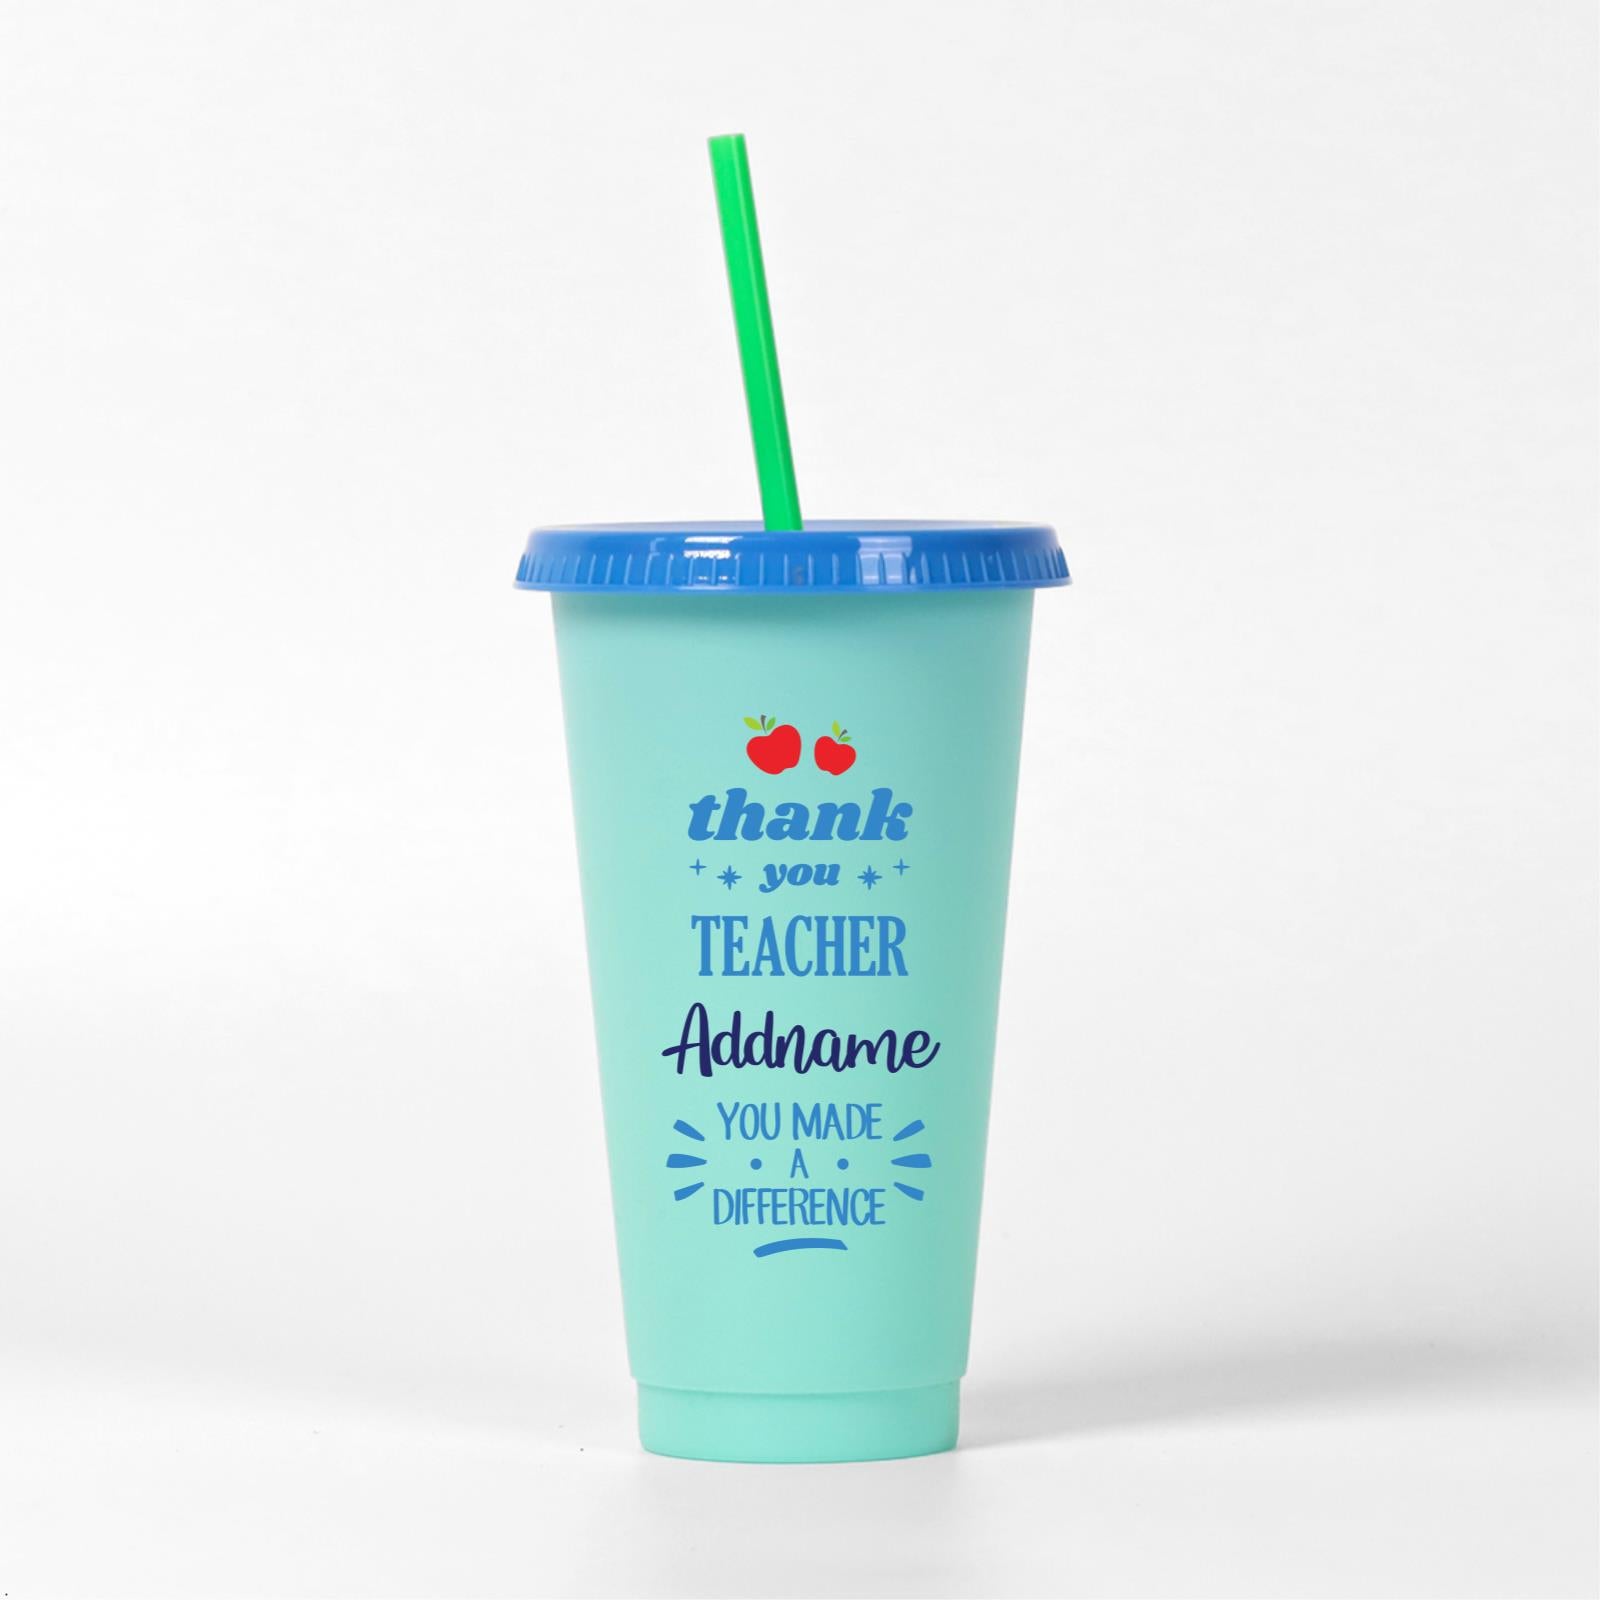 Thank You Teacher Addname You Made A Difference Quote - Turquoise Kori Cup